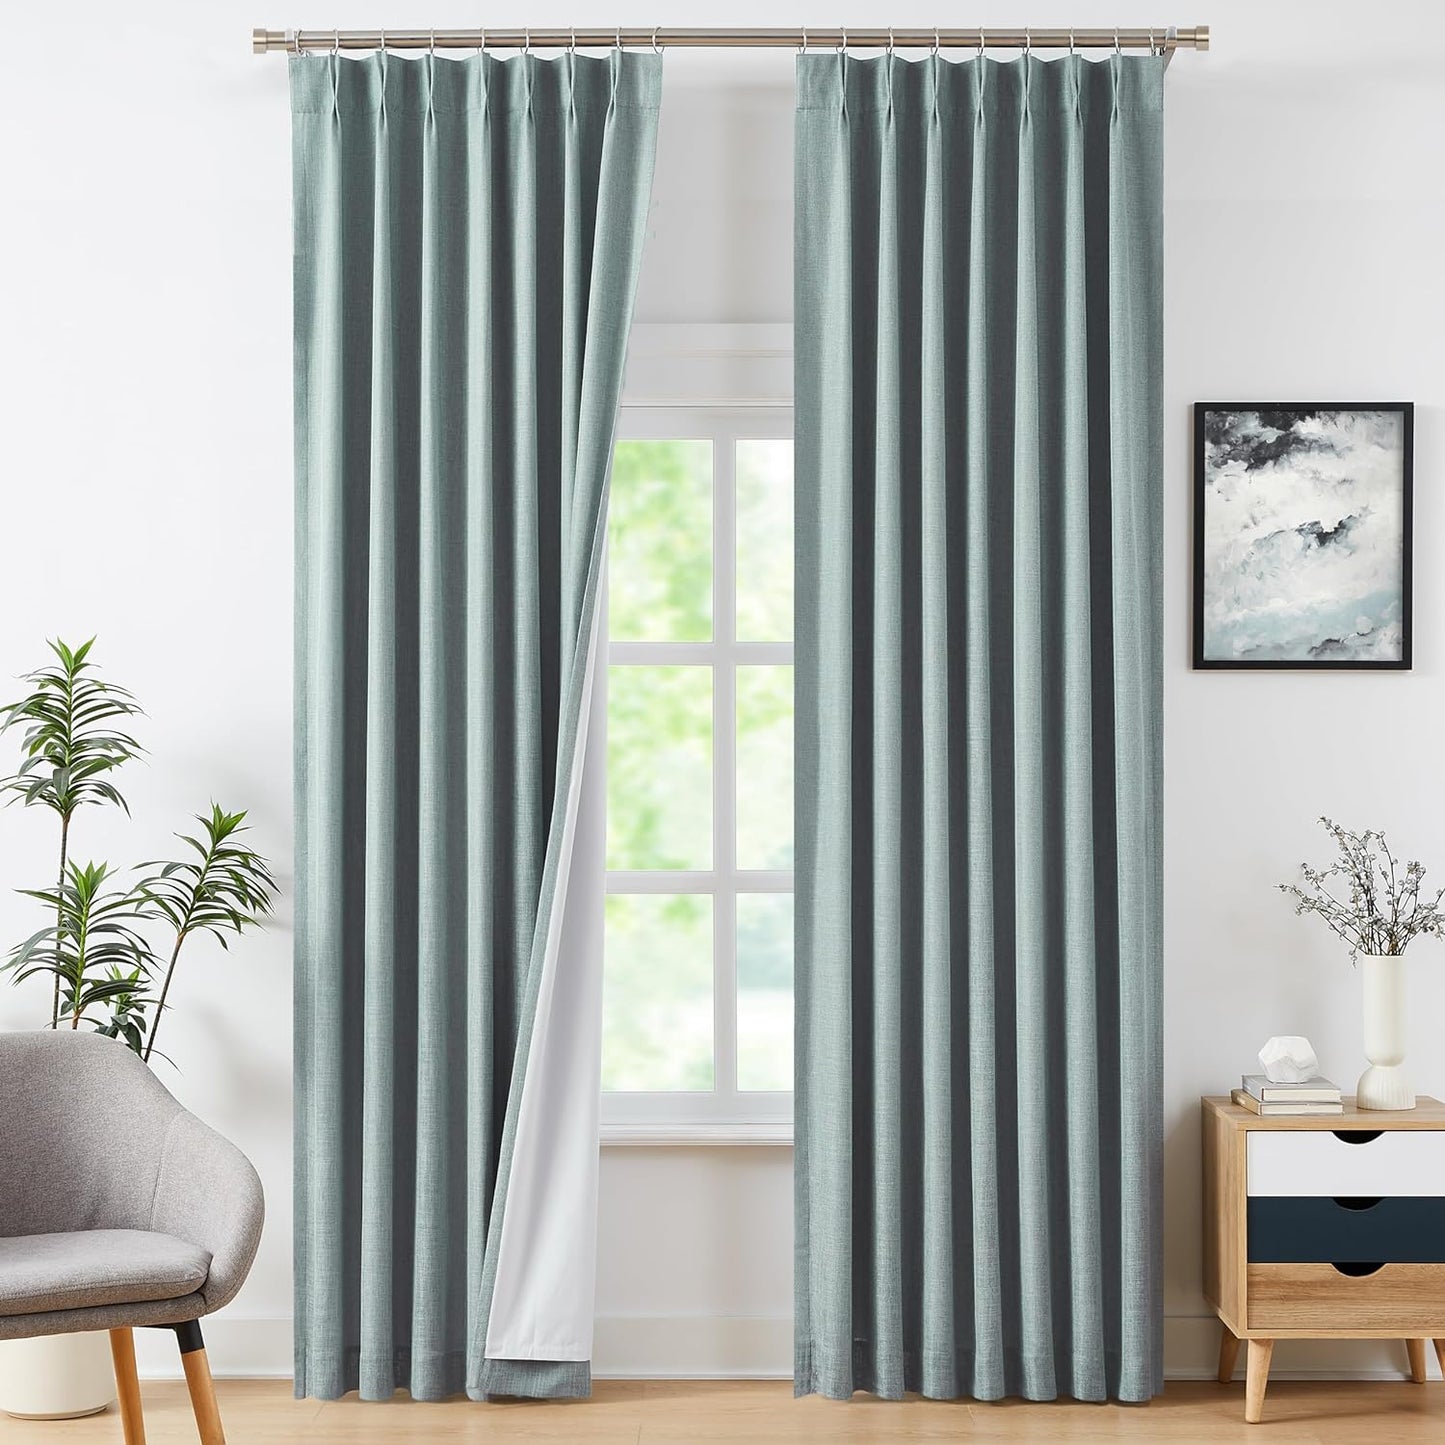 WEST LAKE Extra Long 9 Ft Bailey Linen Pinch Pleat Full Blackout Curtains 108 Inches Length,Natural Pinch Pleated Panels with Back Tabs,Rustic Window Treatment Bedroom Living Room,40"Wx108"Lx2,Natural  WEST LAKE Mineral Green 40"X120"X2 